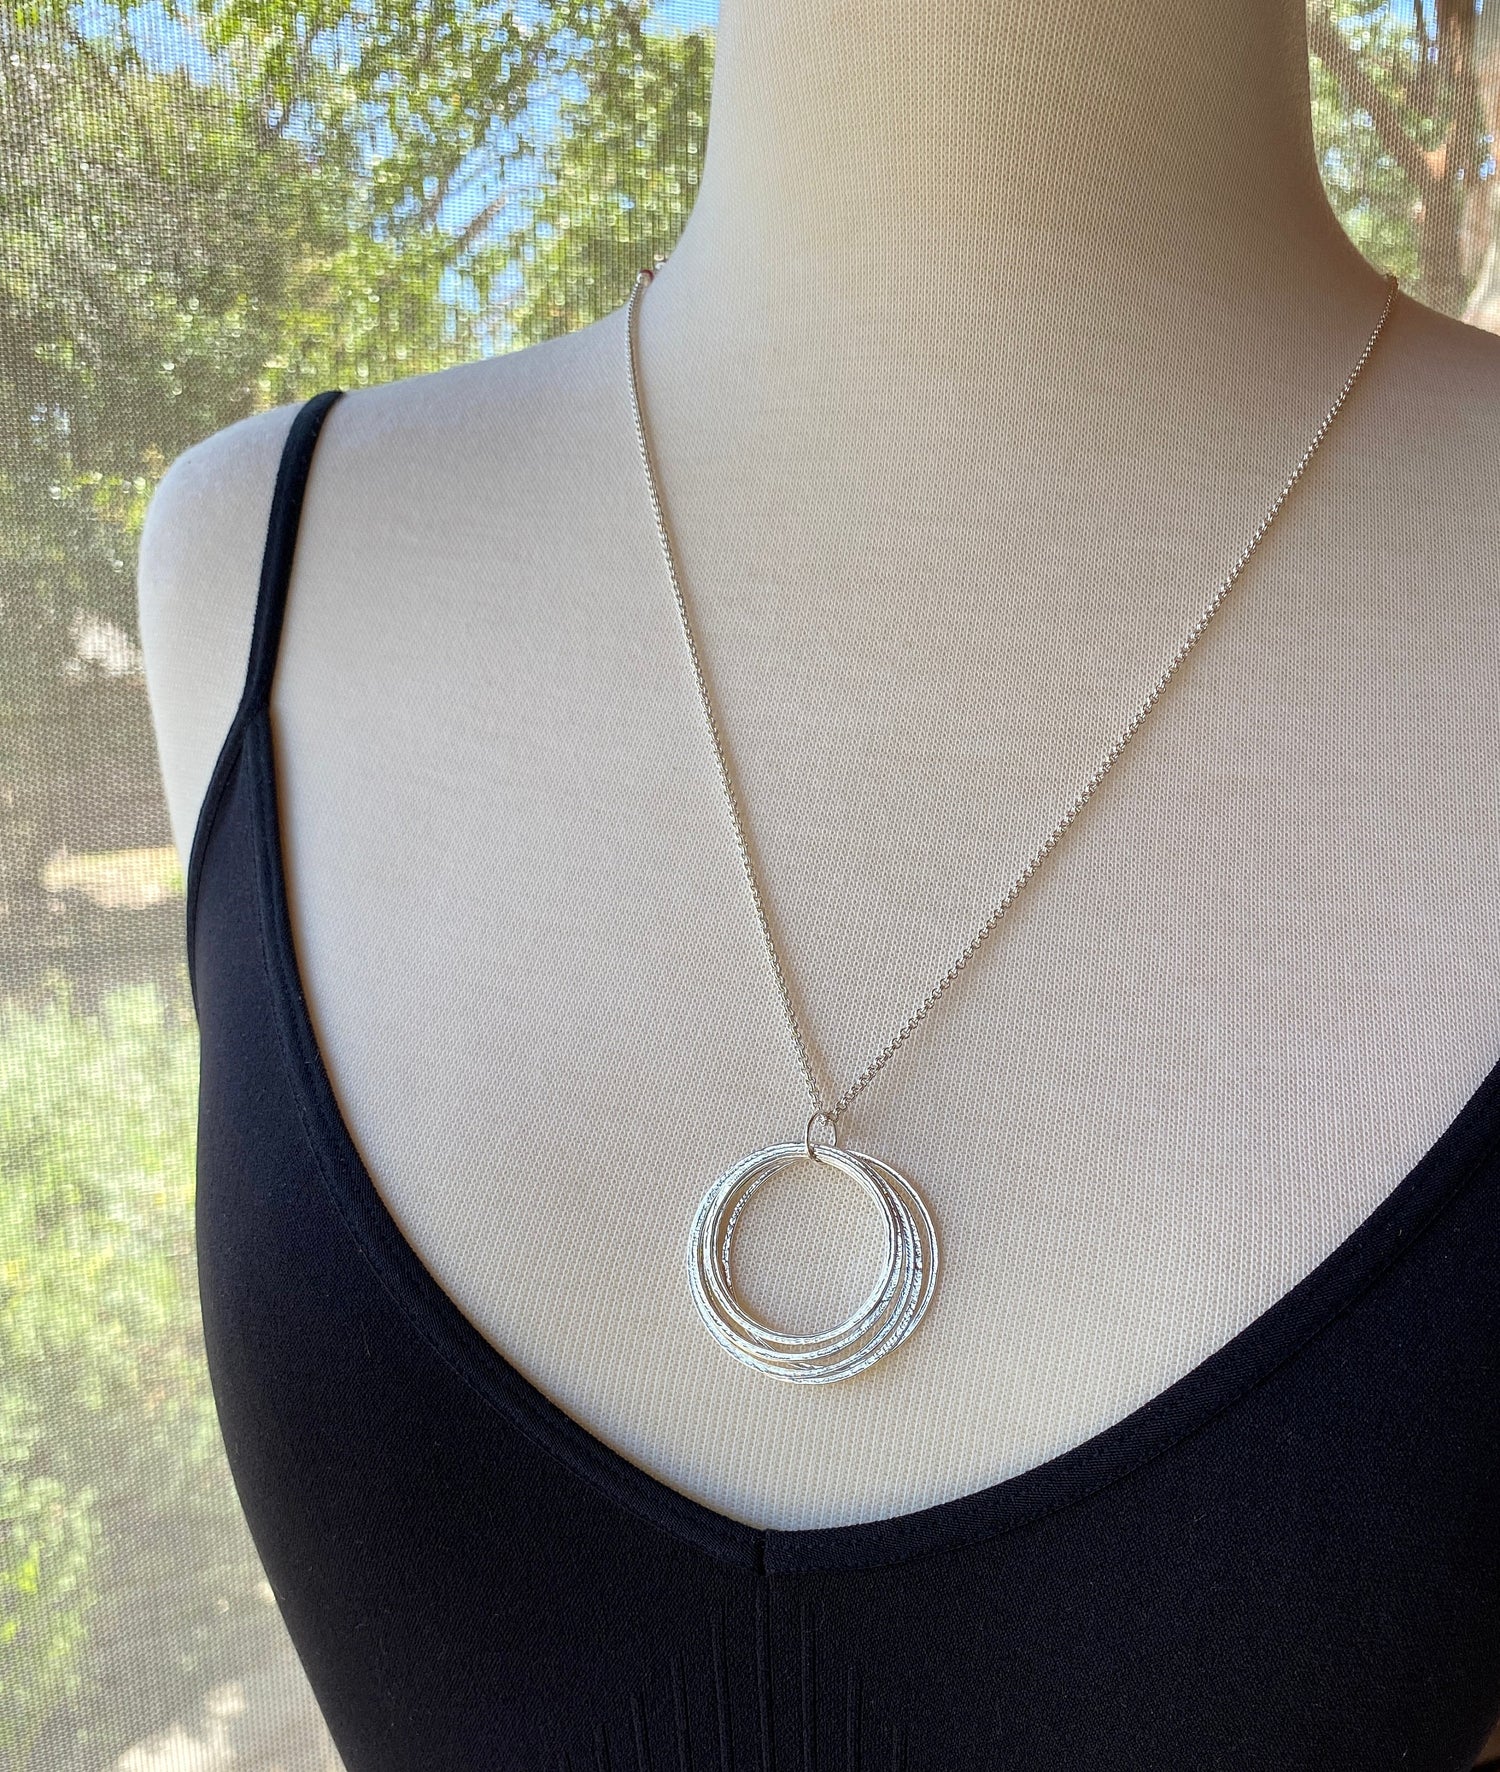 60th Birthday Milestone Necklace, Bold Sterling Silver Handcrafted Sparkly Circles Pendant, 6 Rings for 6 Decades, Large Six Circle Pendant